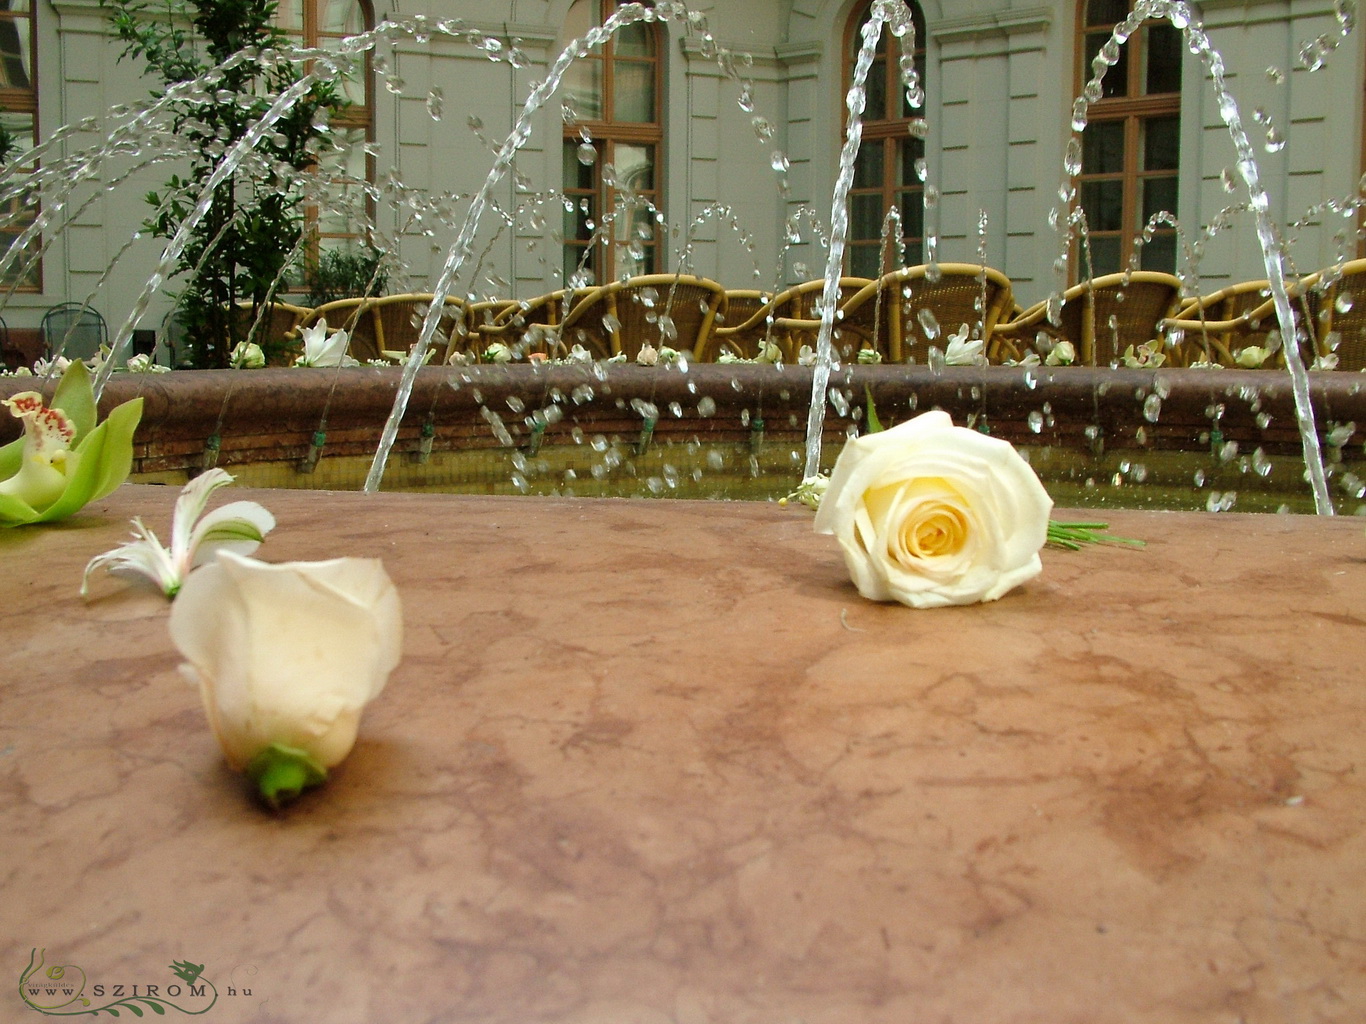 flower delivery Budapest - Flowers around the fountain , (white rose) Ybl palace, wedding